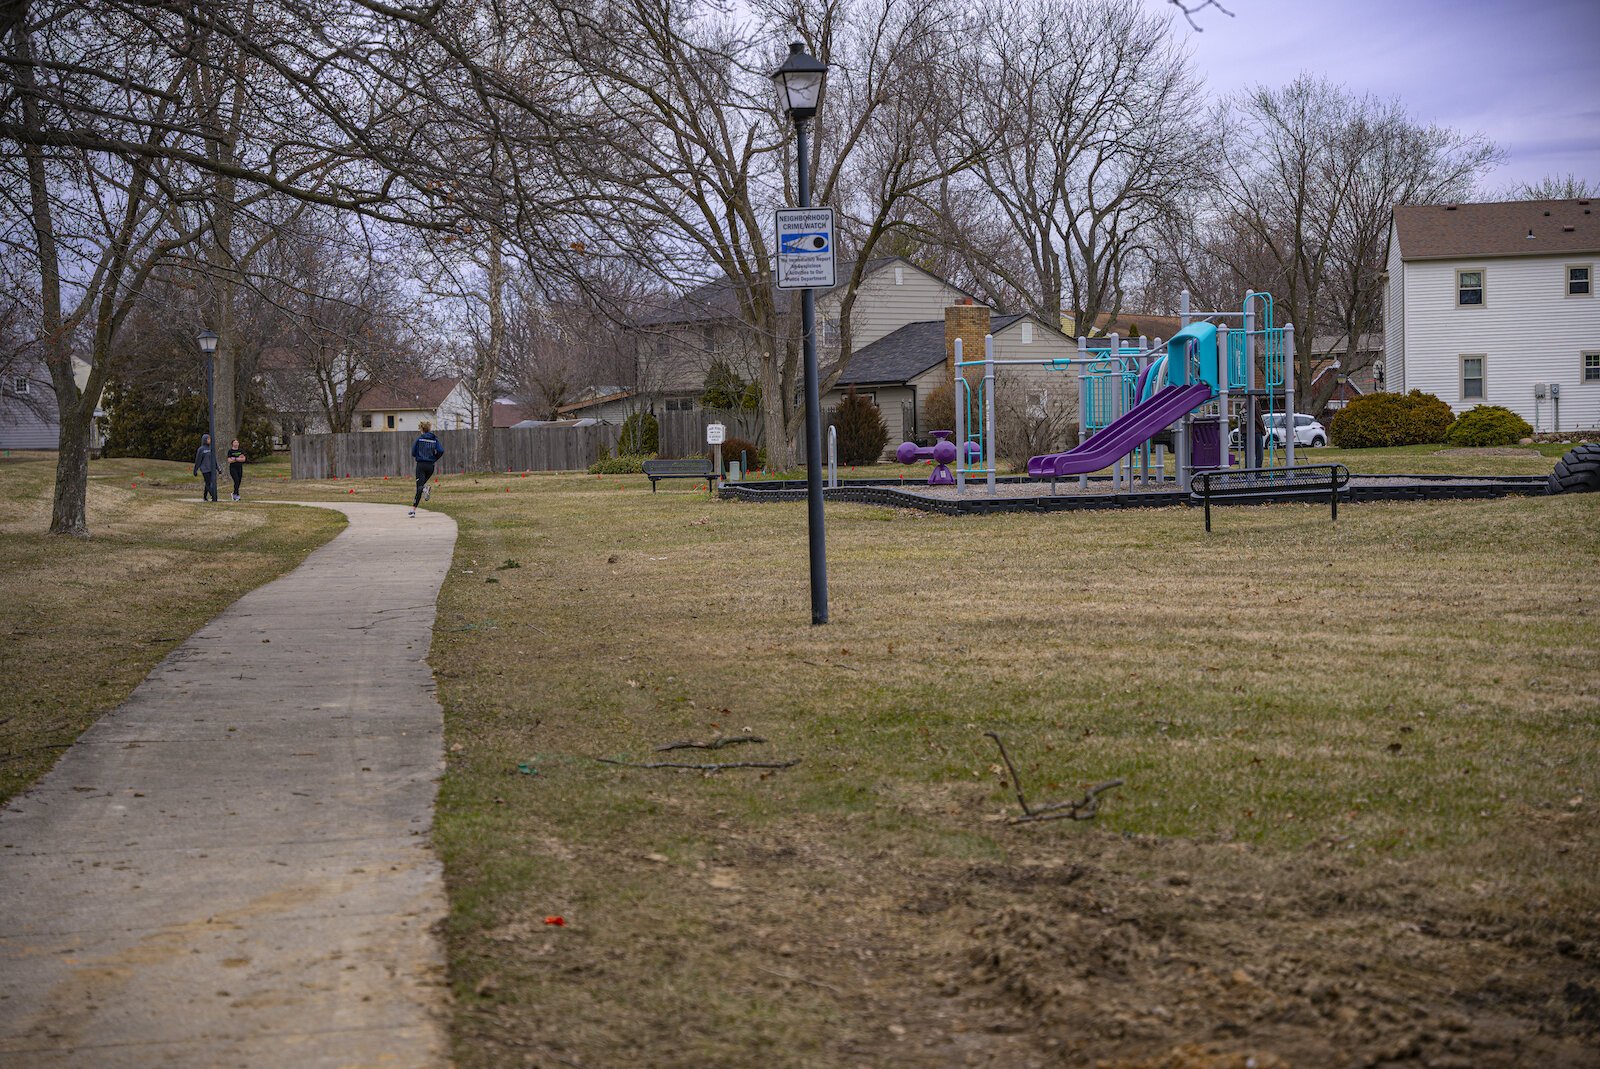 For example, Brister Spring Park, in the Walden Neighborhood, is not a city park. Rather, it was created by the developers of the subdivision.